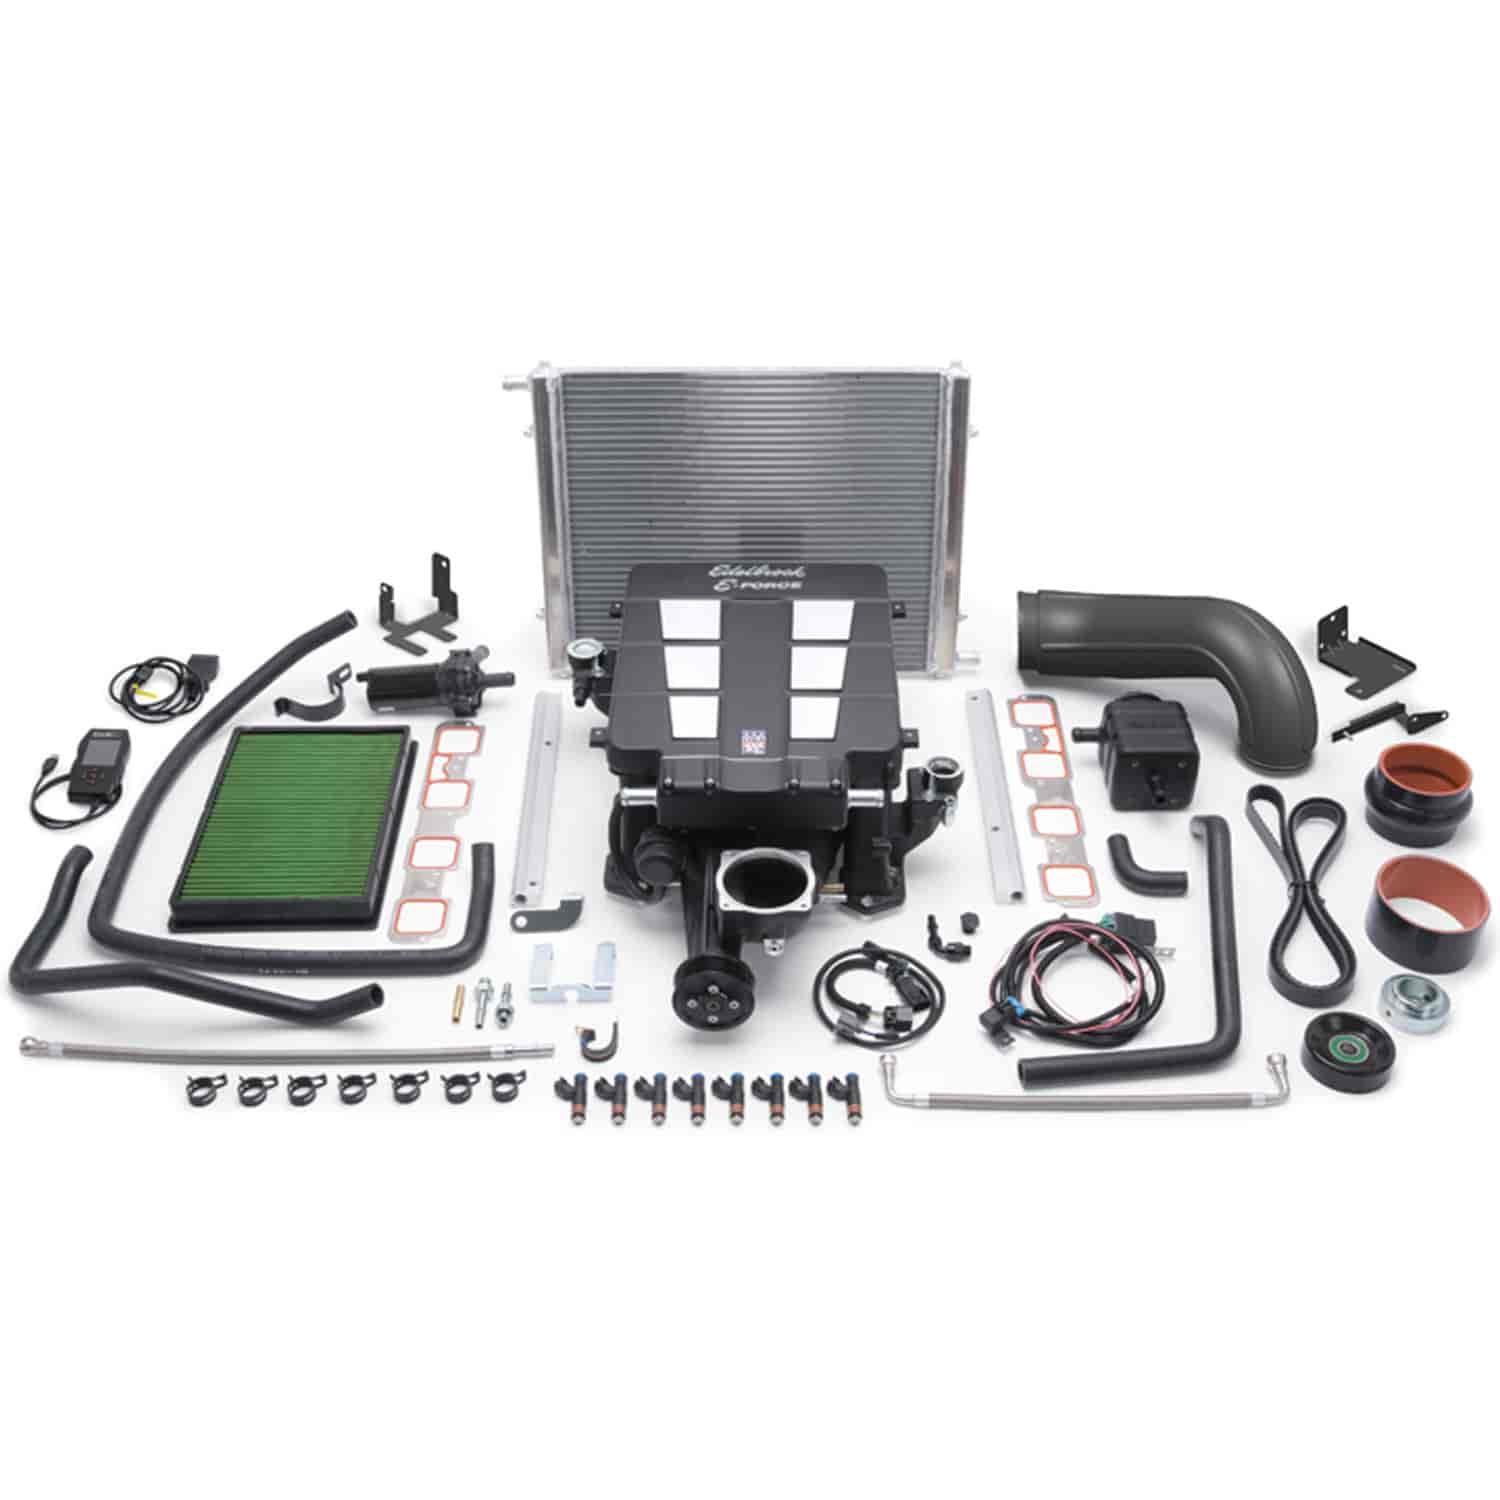 E-Force Stage 1 Supercharger System 2009-2014 5.7L HEMI Dodge Ram Truck